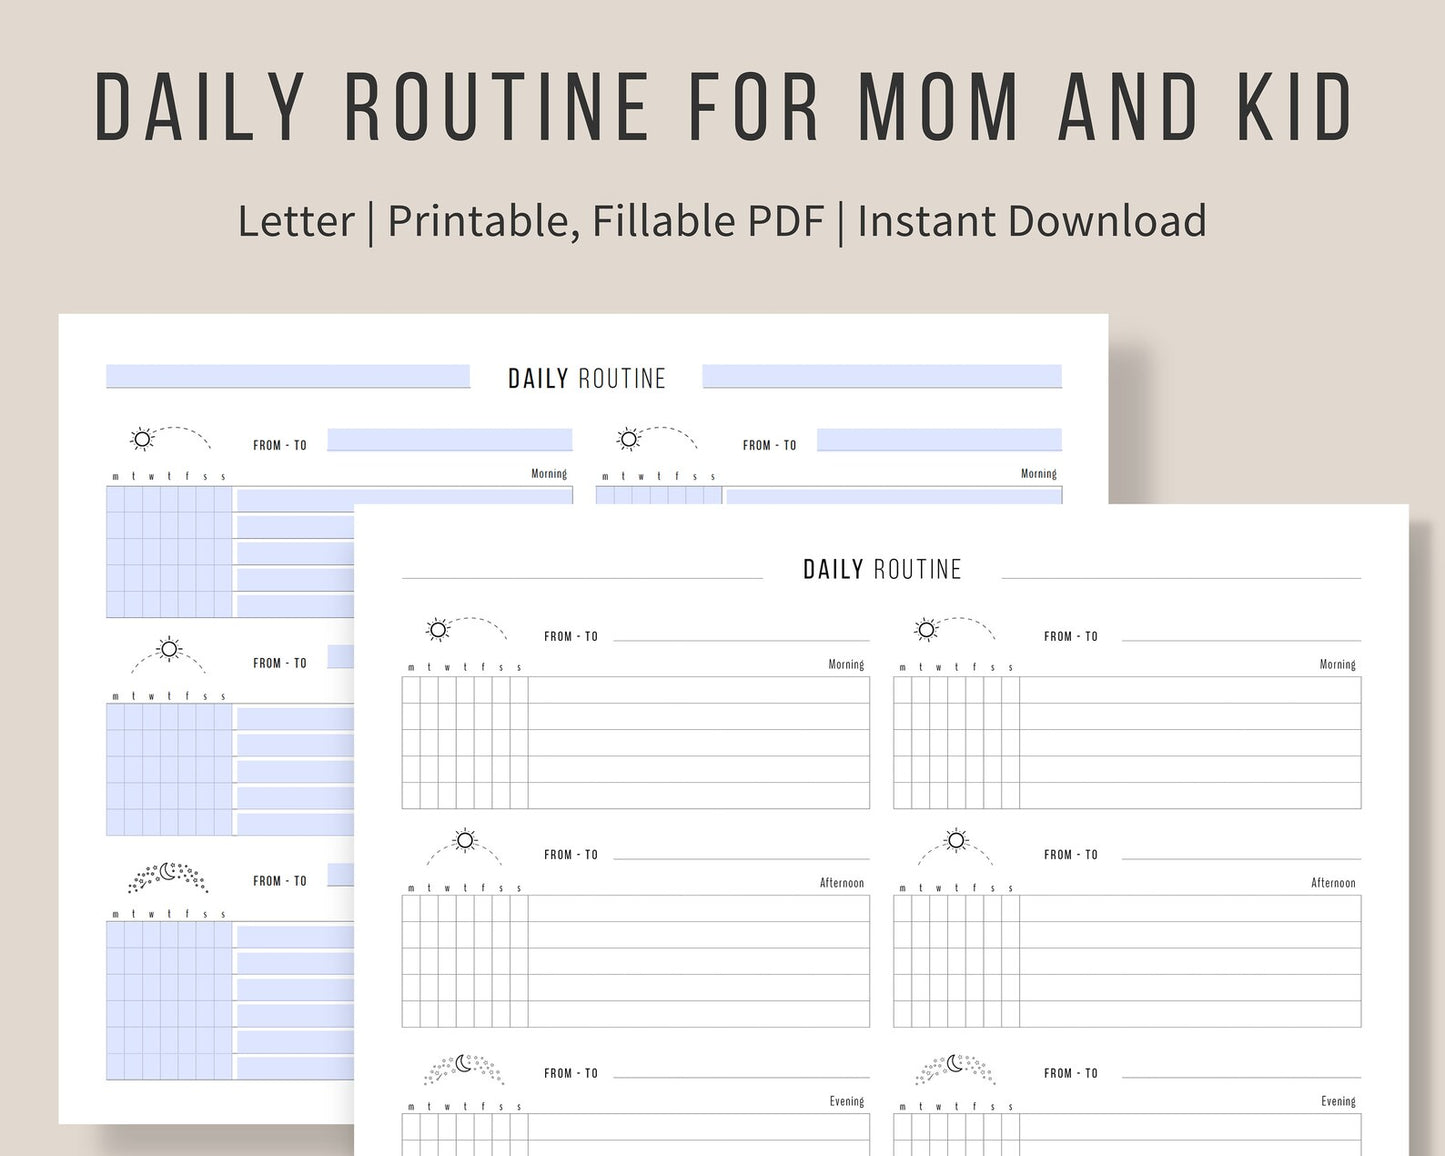 Daily Routine for Family - Printable Planner PDF - Letter